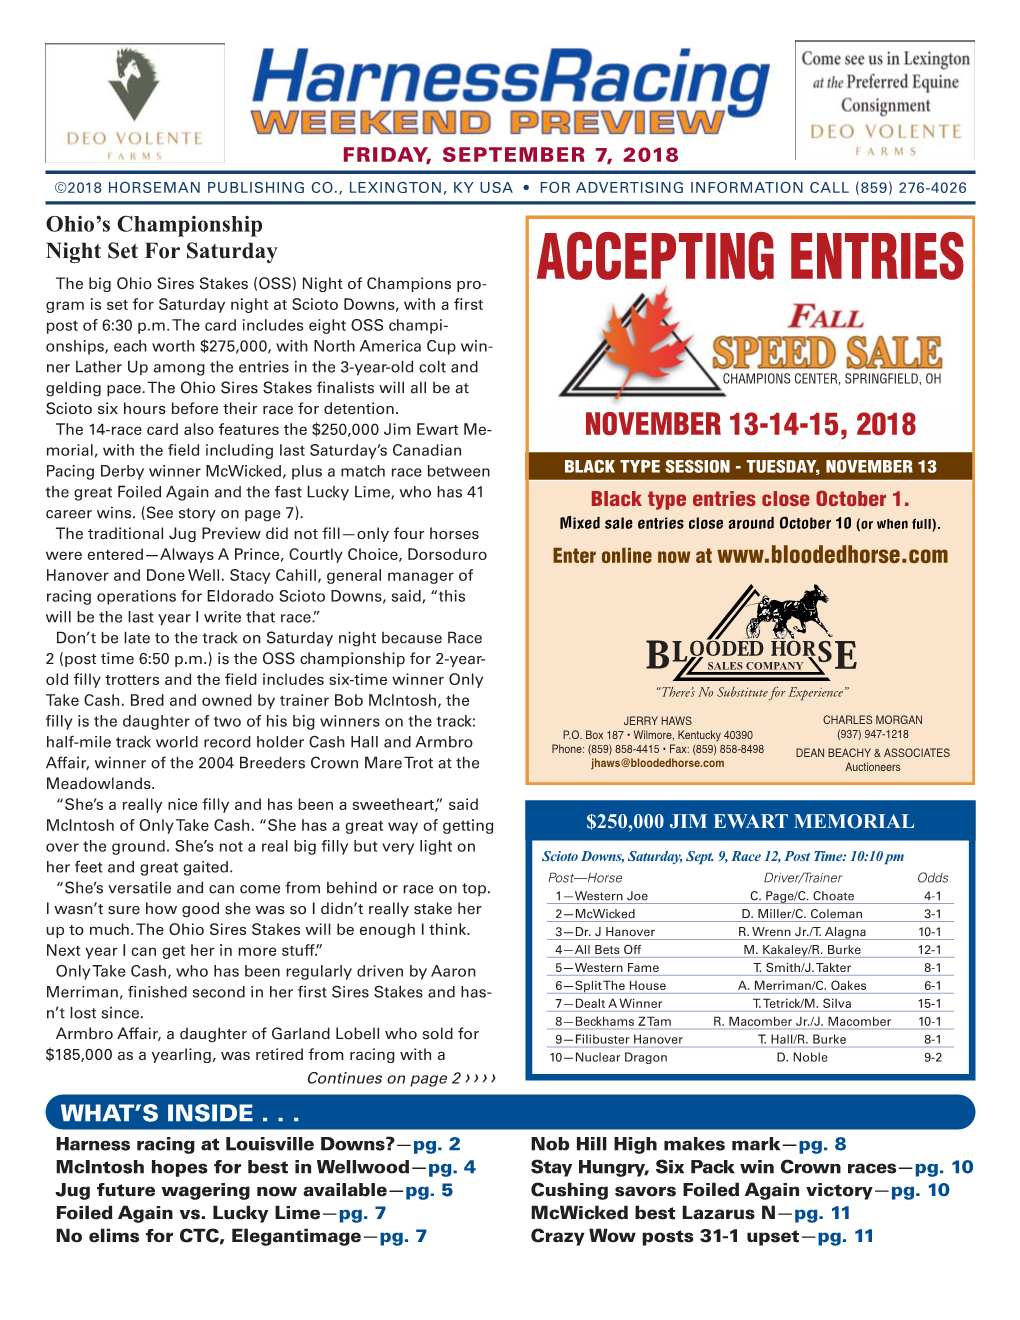 ACCEPTING ENTRIES the Big Ohio Sires Stakes (OSS) Night of Champions Pro- Gram Is Set for Saturday Night at Scioto Downs, with a First Post of 6:30 P.M